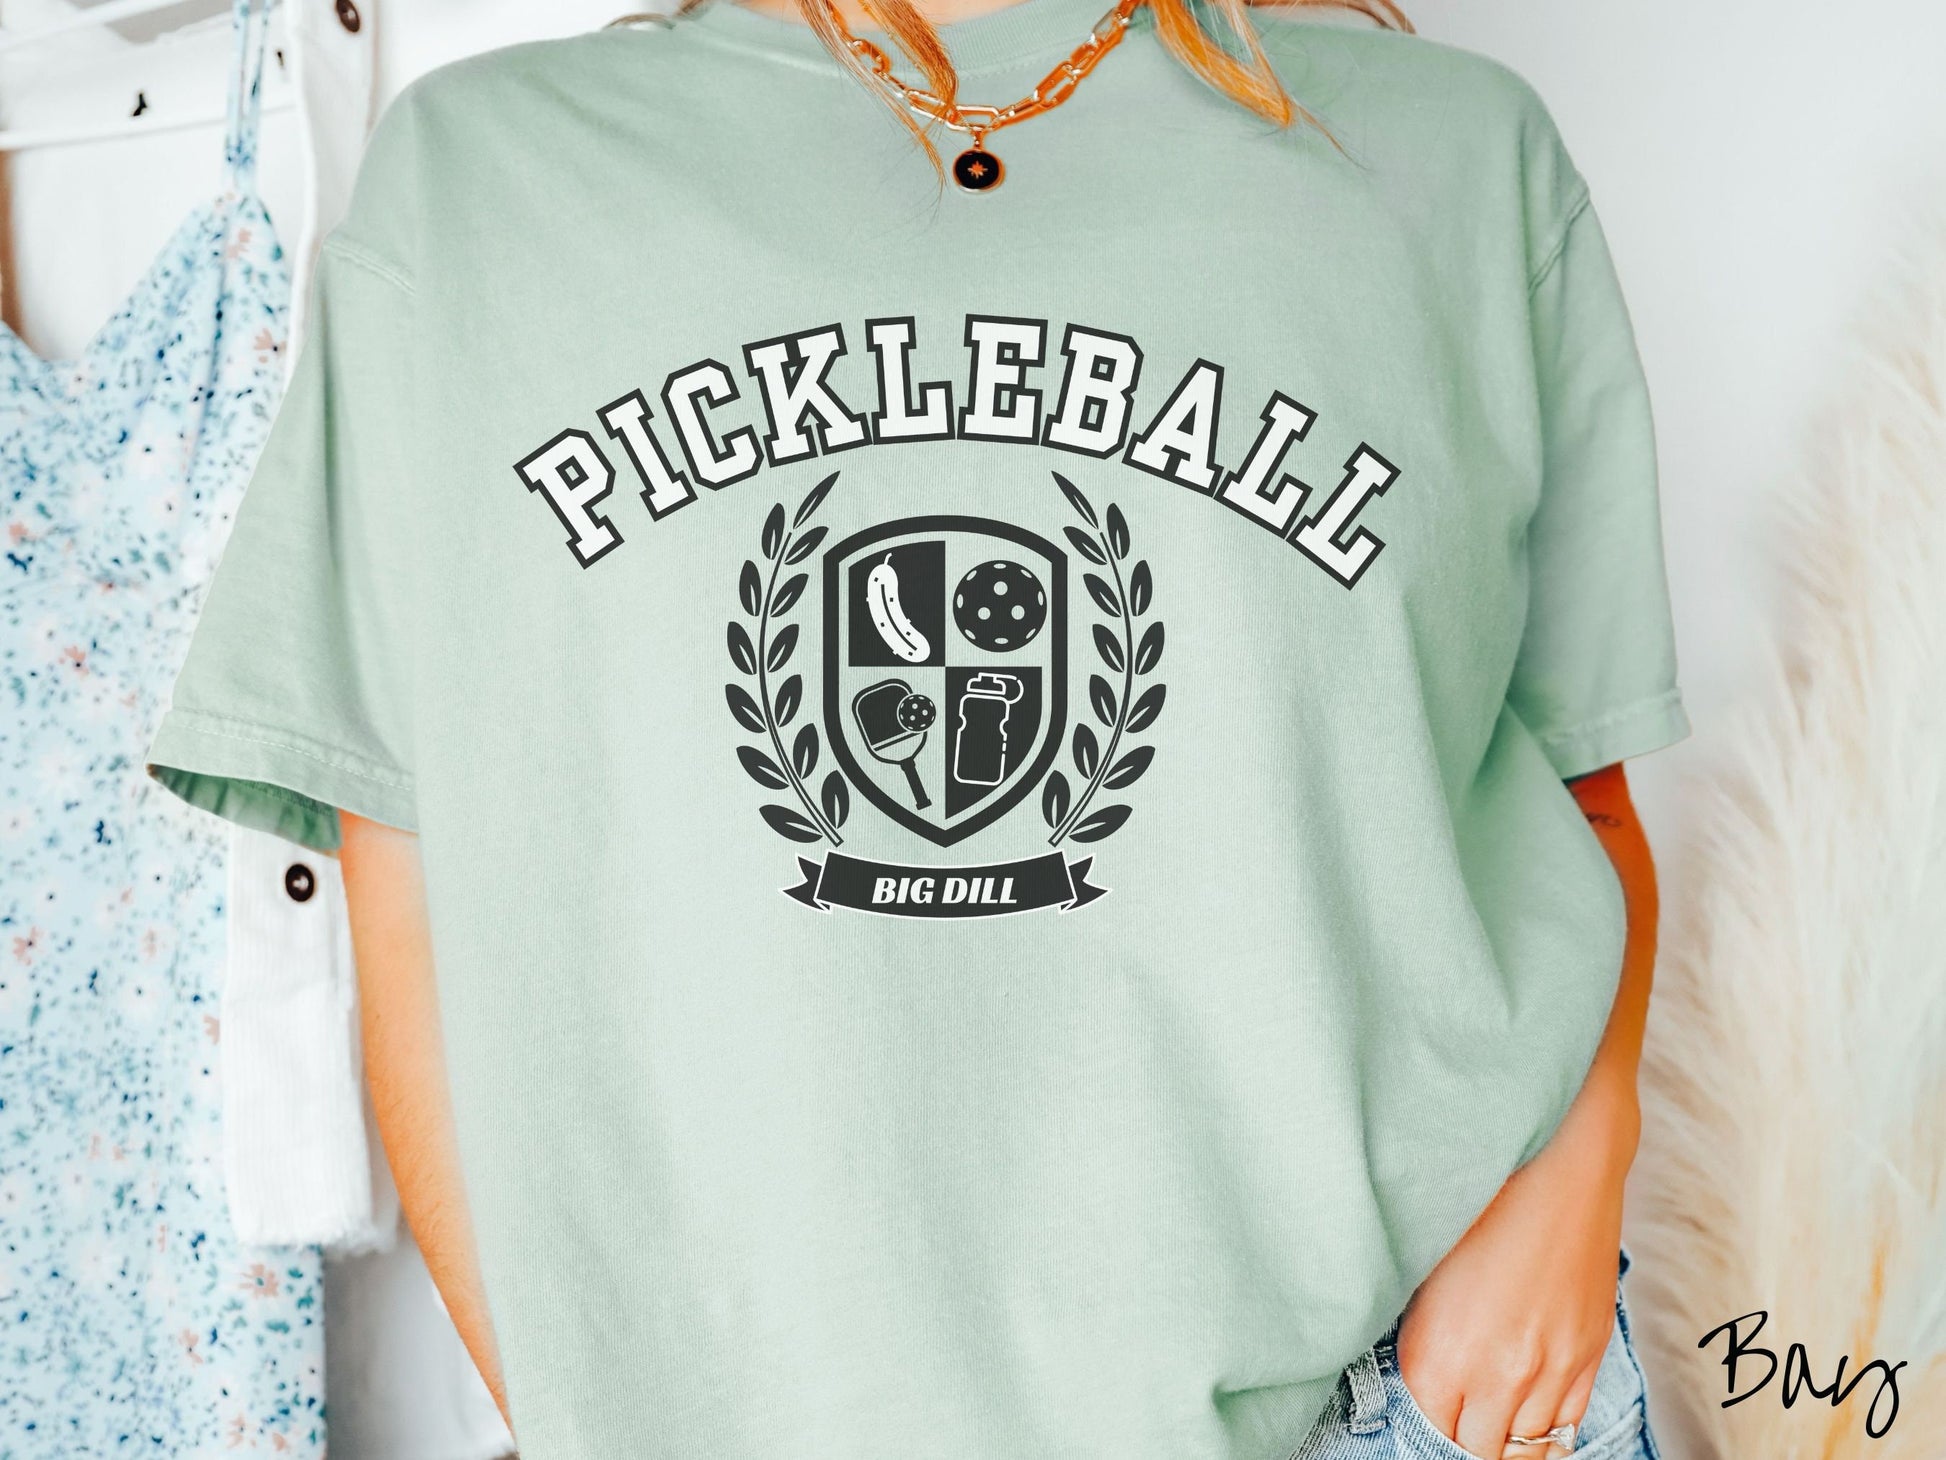 A woman wearing a cute bay colored shirt with the text Pickleball across the top, a varsity logo centered underneath, and the words Big Dill underneath the logo.